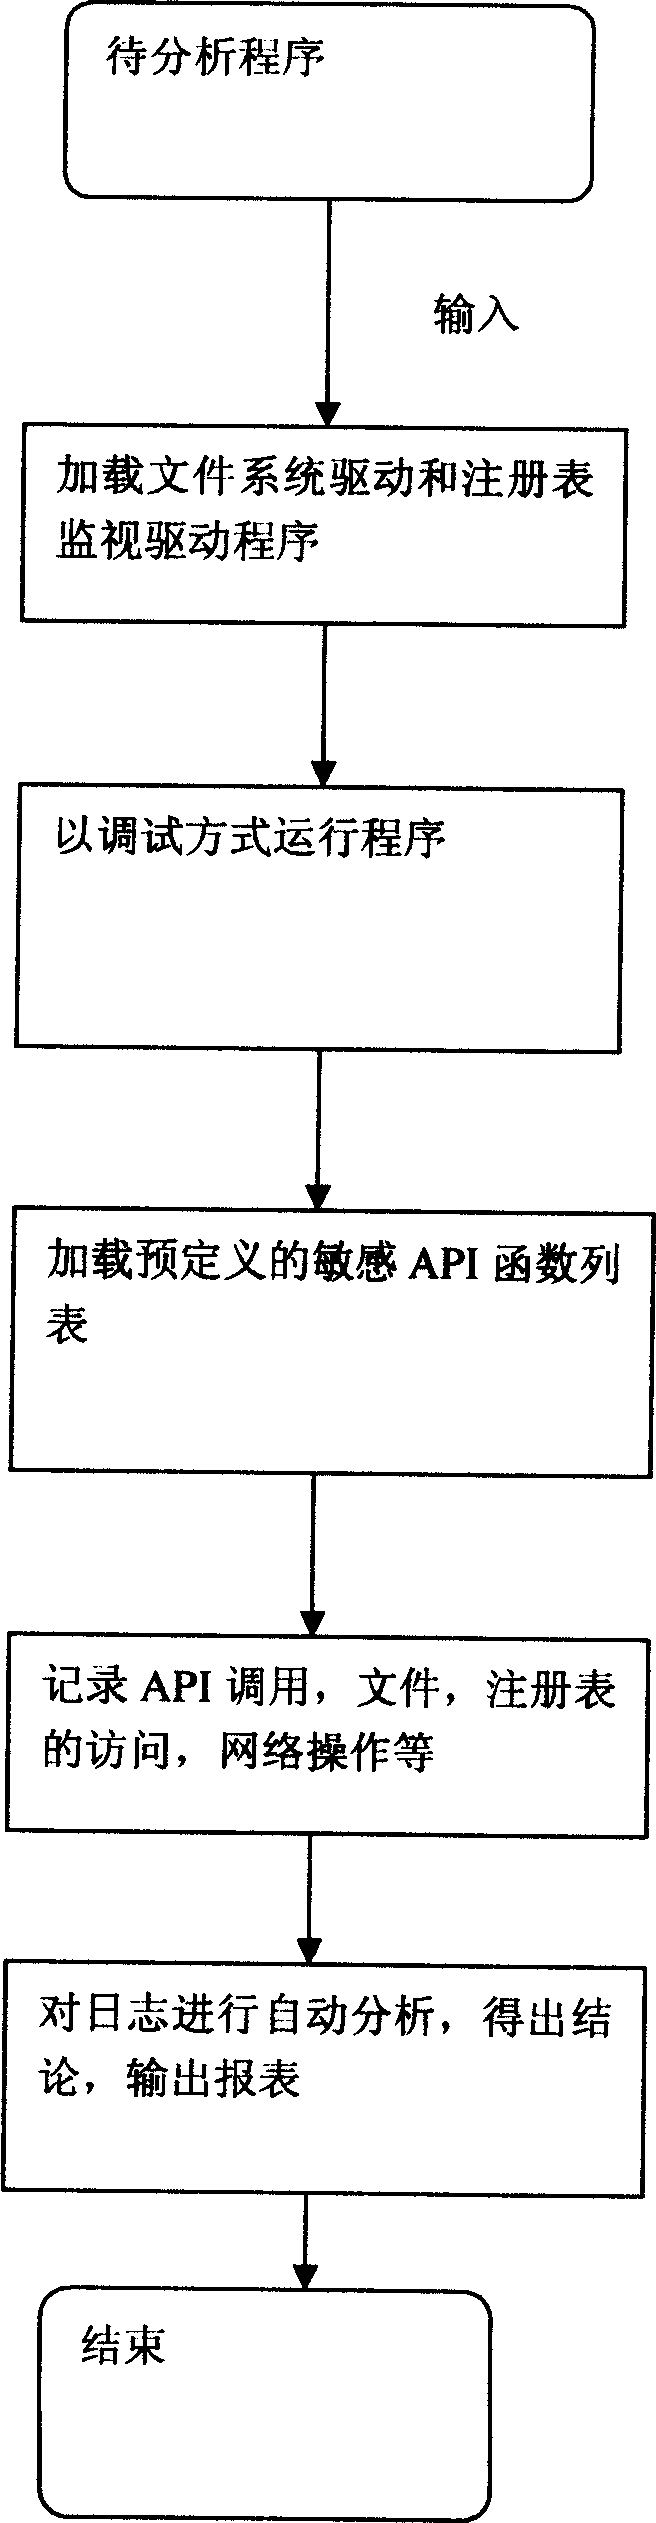 Automatic analysis system and method for malicious code